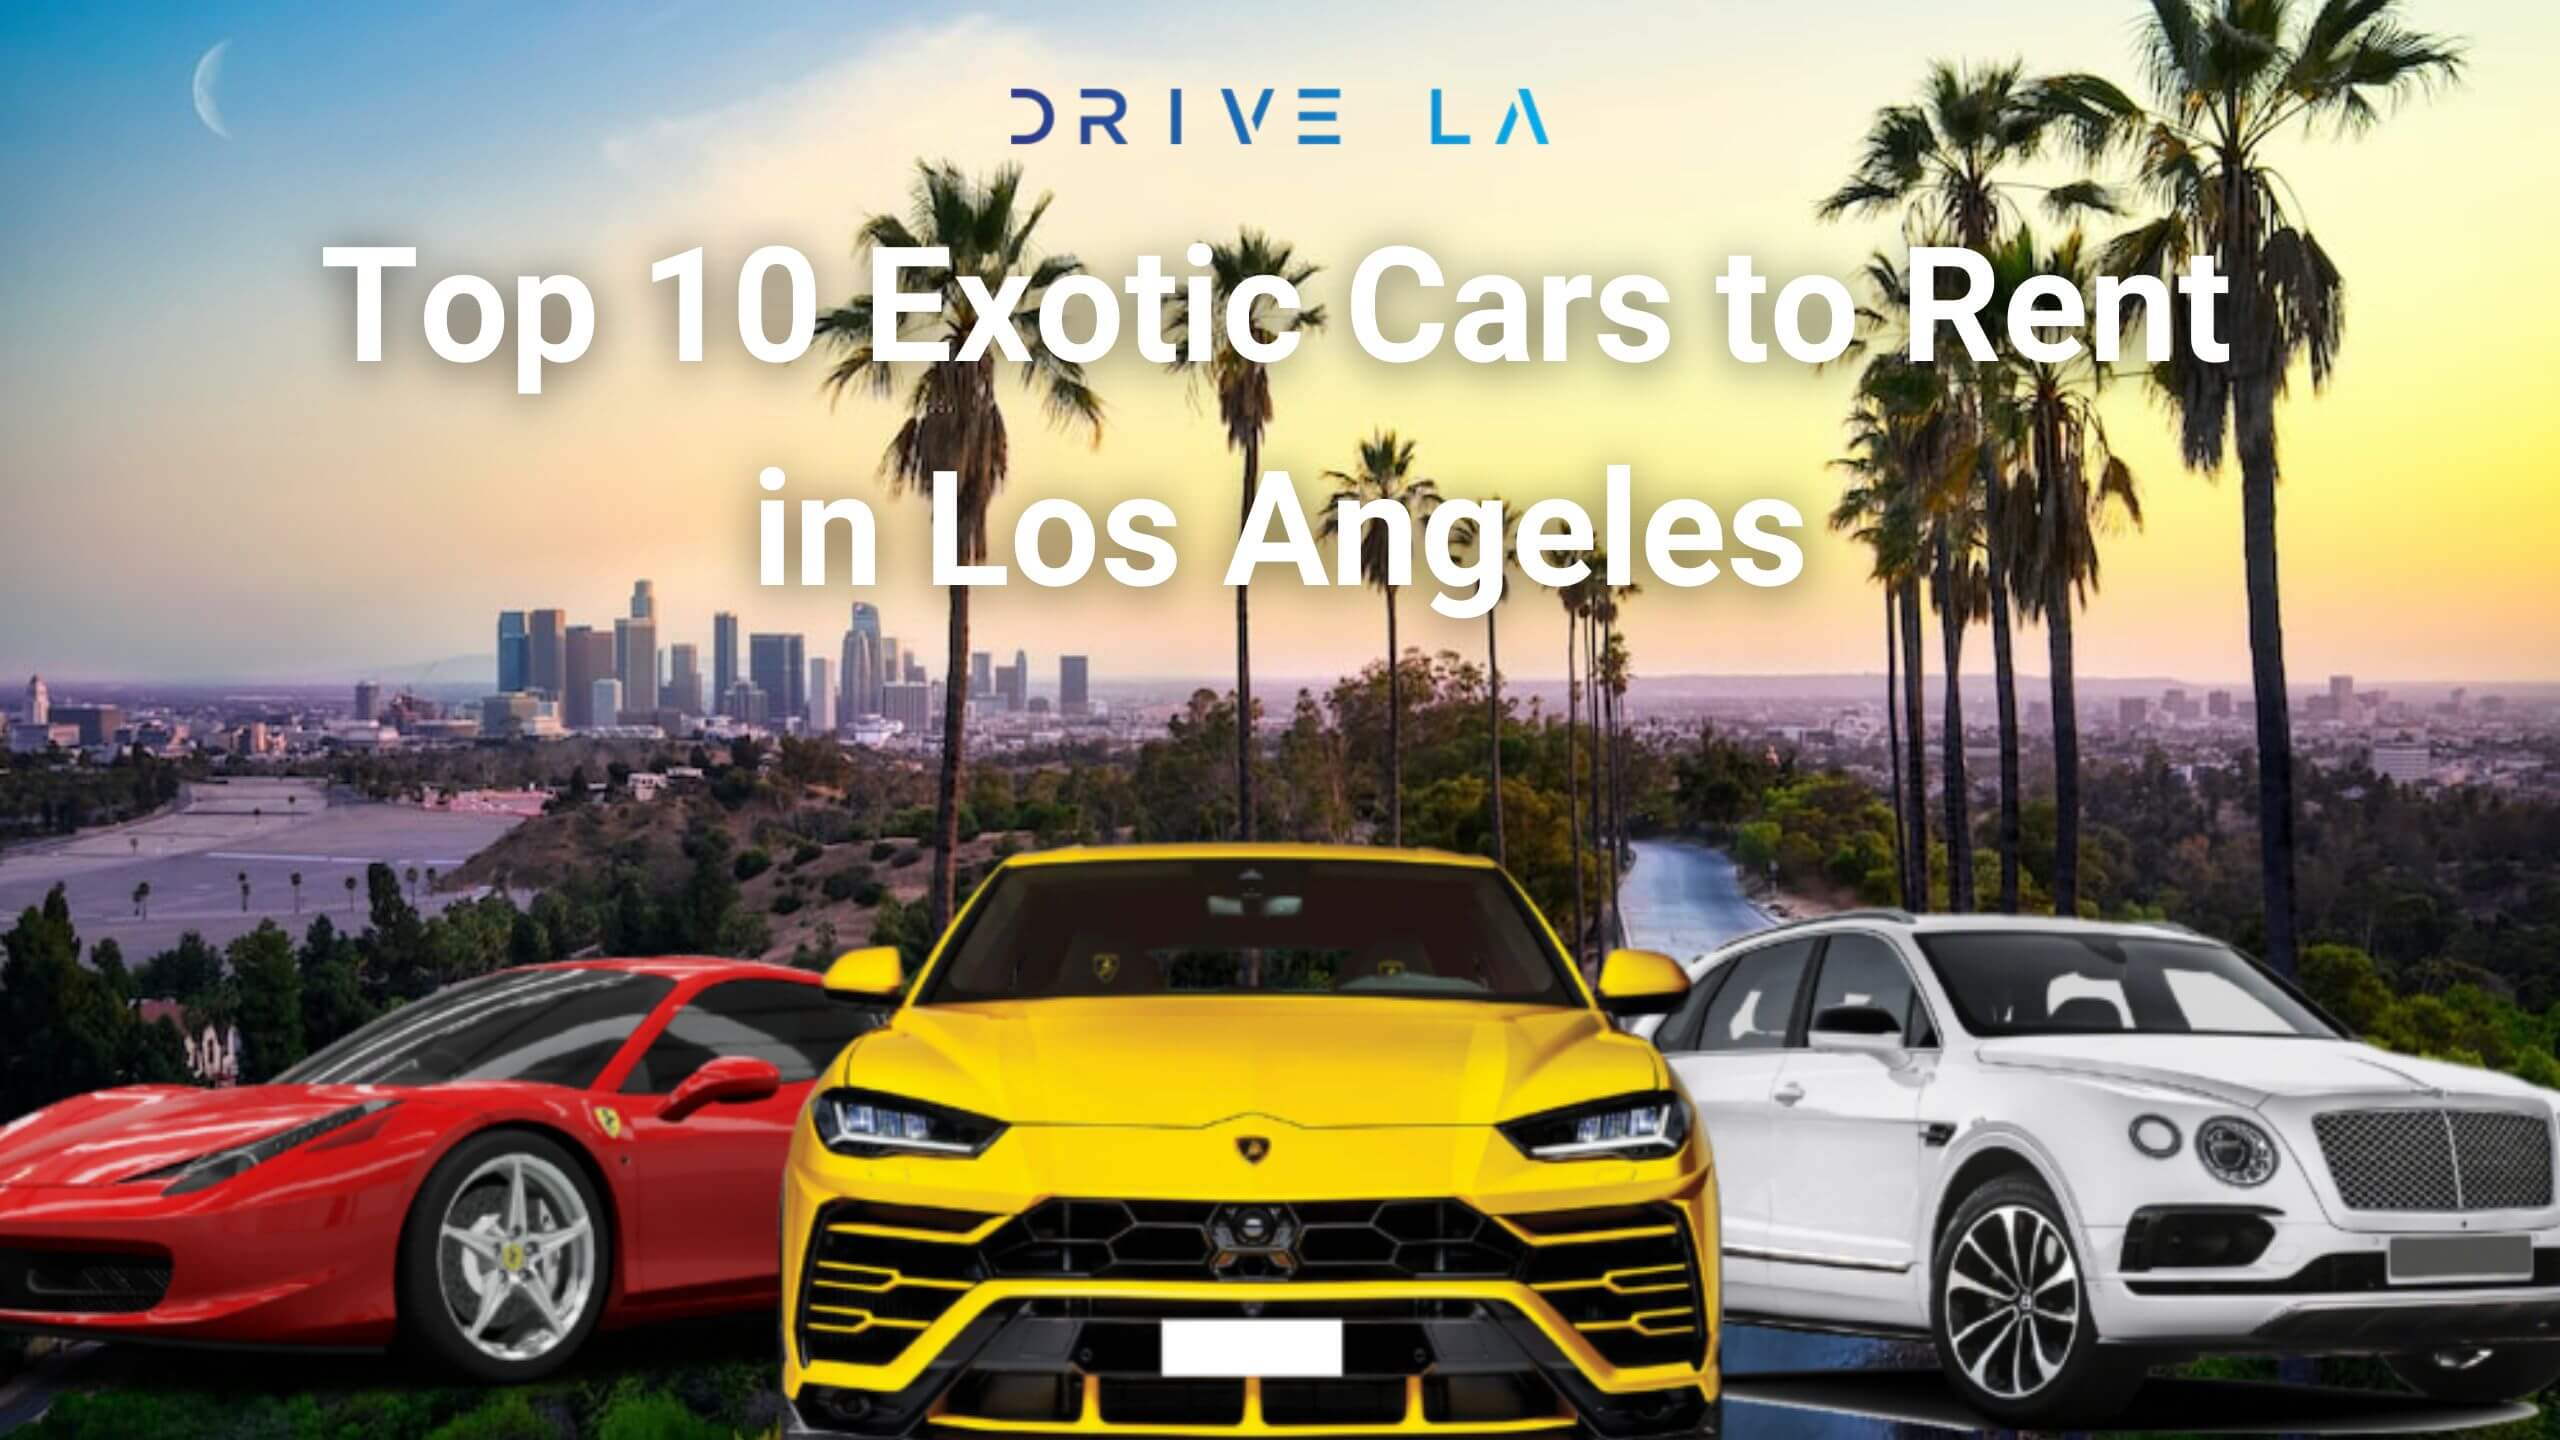 Top 10 Exotic Cars to Rent in Los Angeles